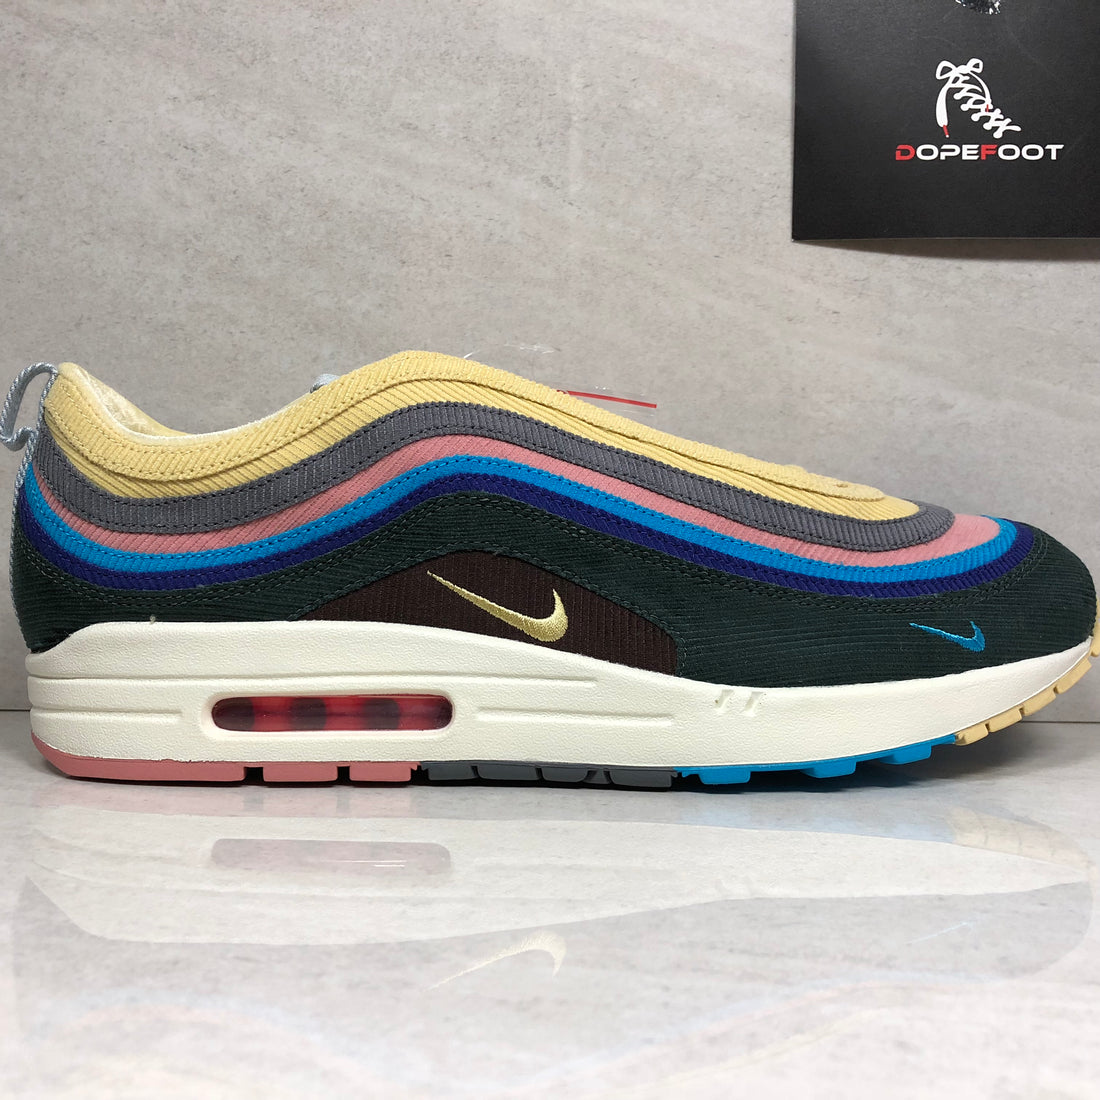 Nike Air Max 1/97 VF SW Sean Wotherspoon Real vs Fake Guide - Photos, Videos, and Notes